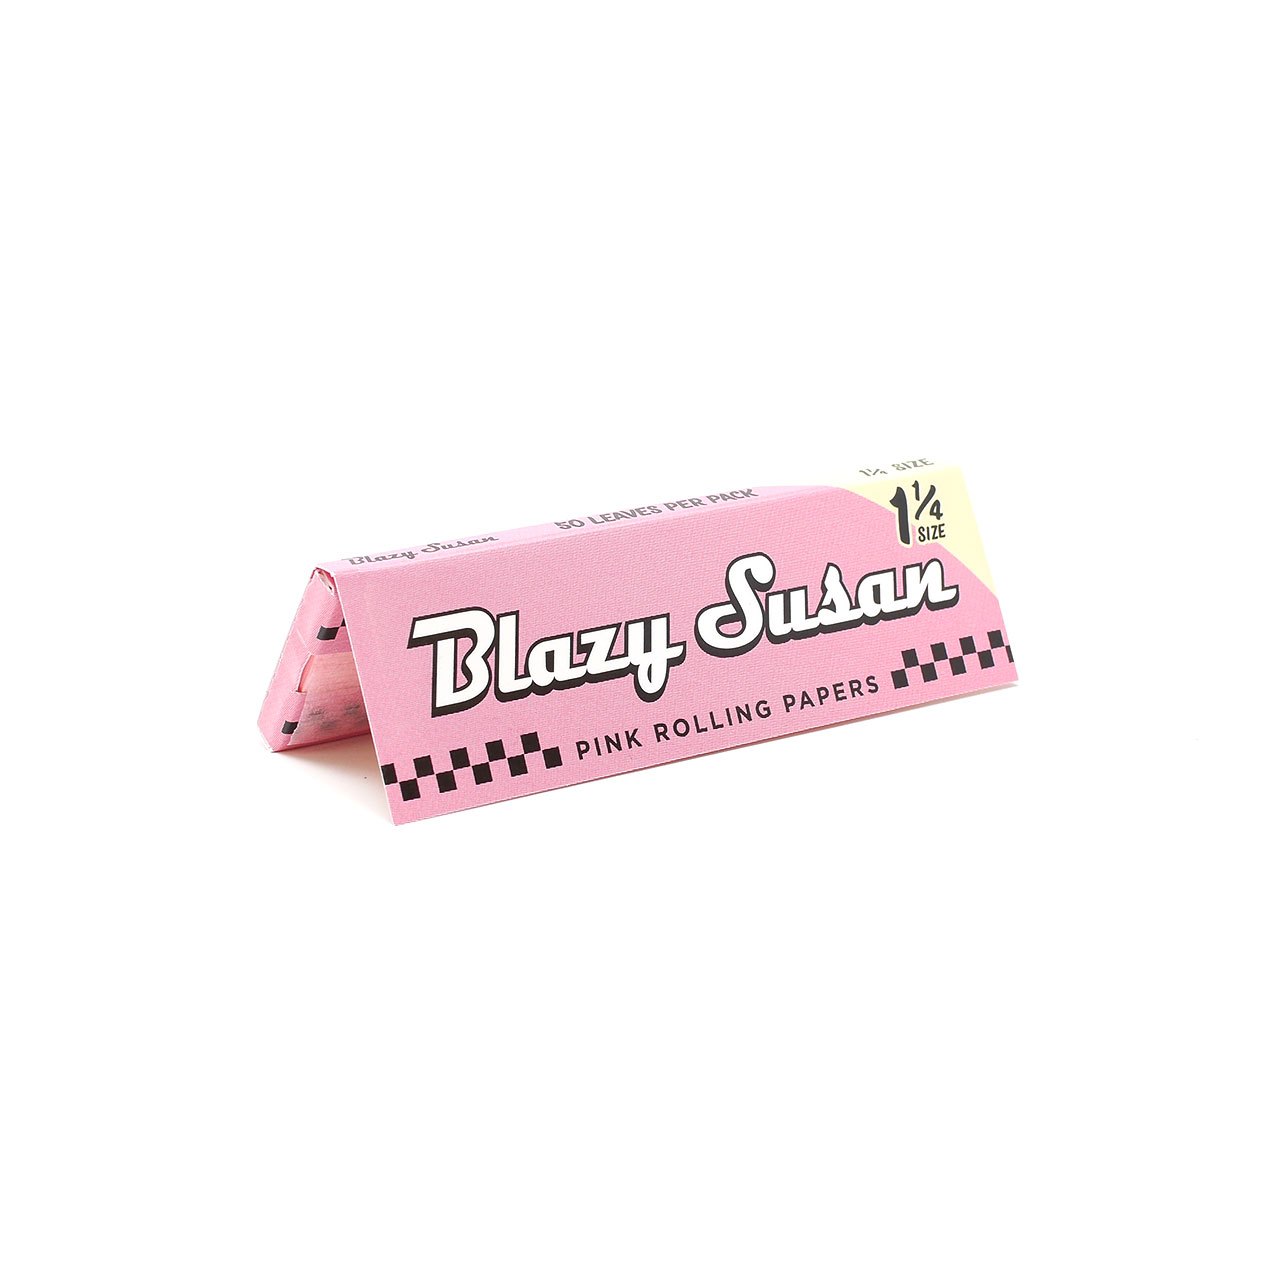 Blazy Susan 1 1/4 rolling Papers